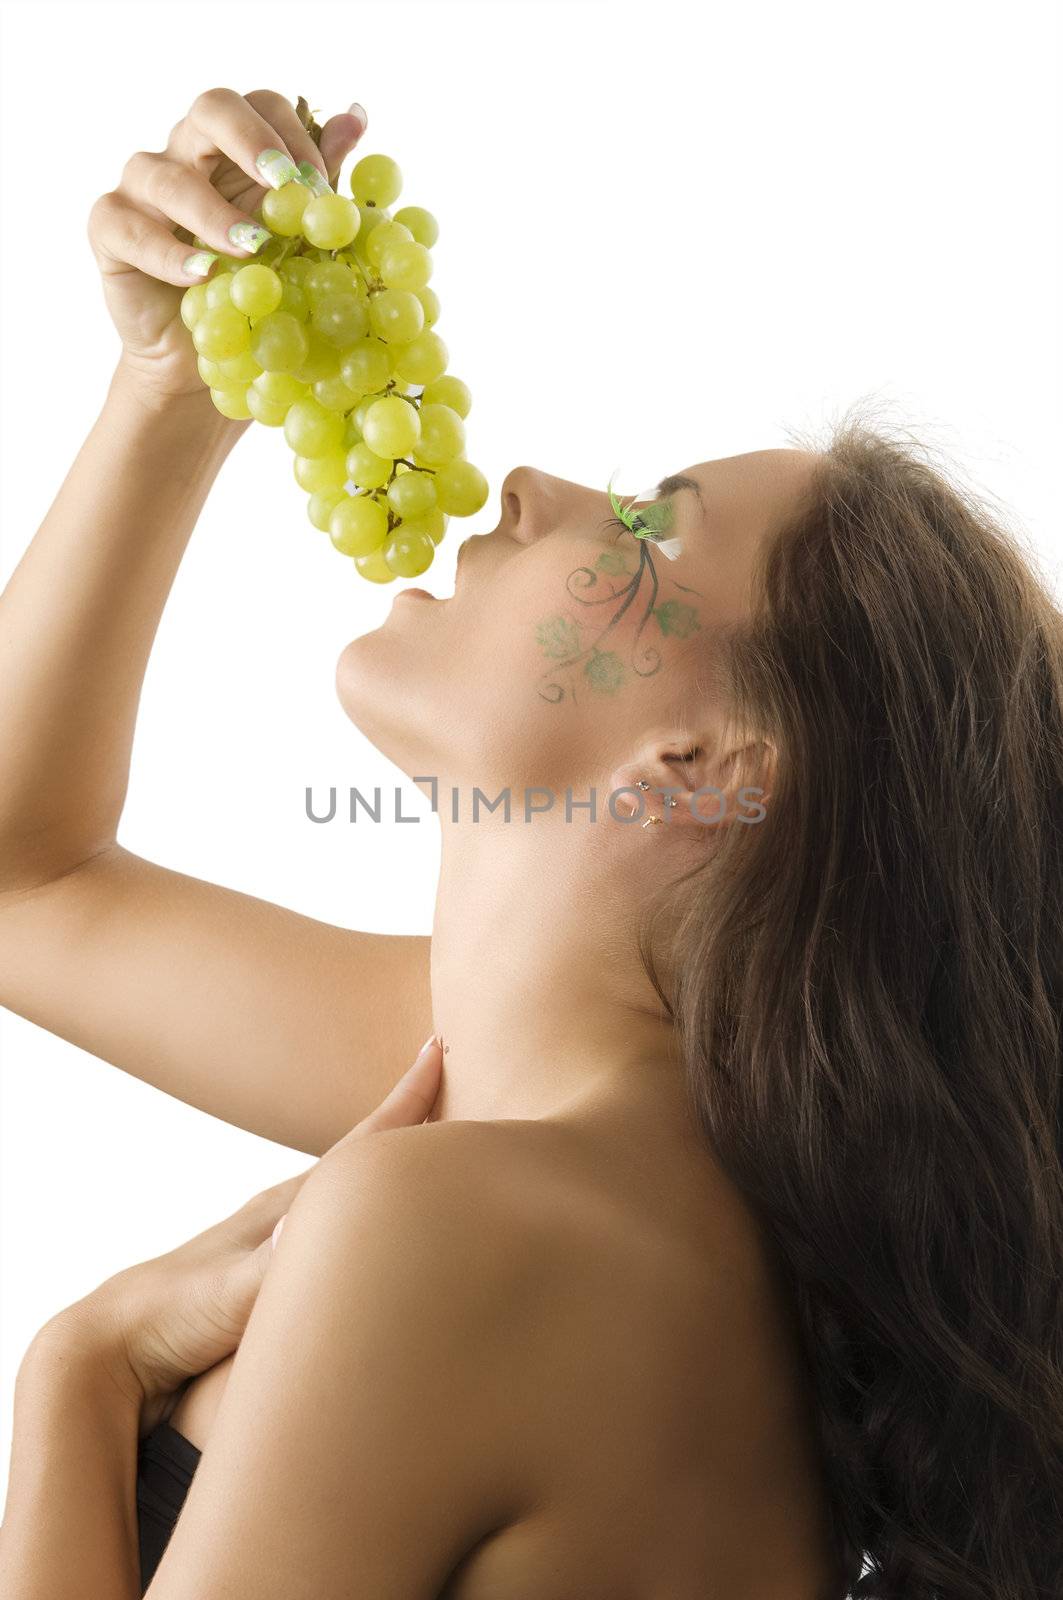 girl eating grape with a nice body paint with leaf on her face